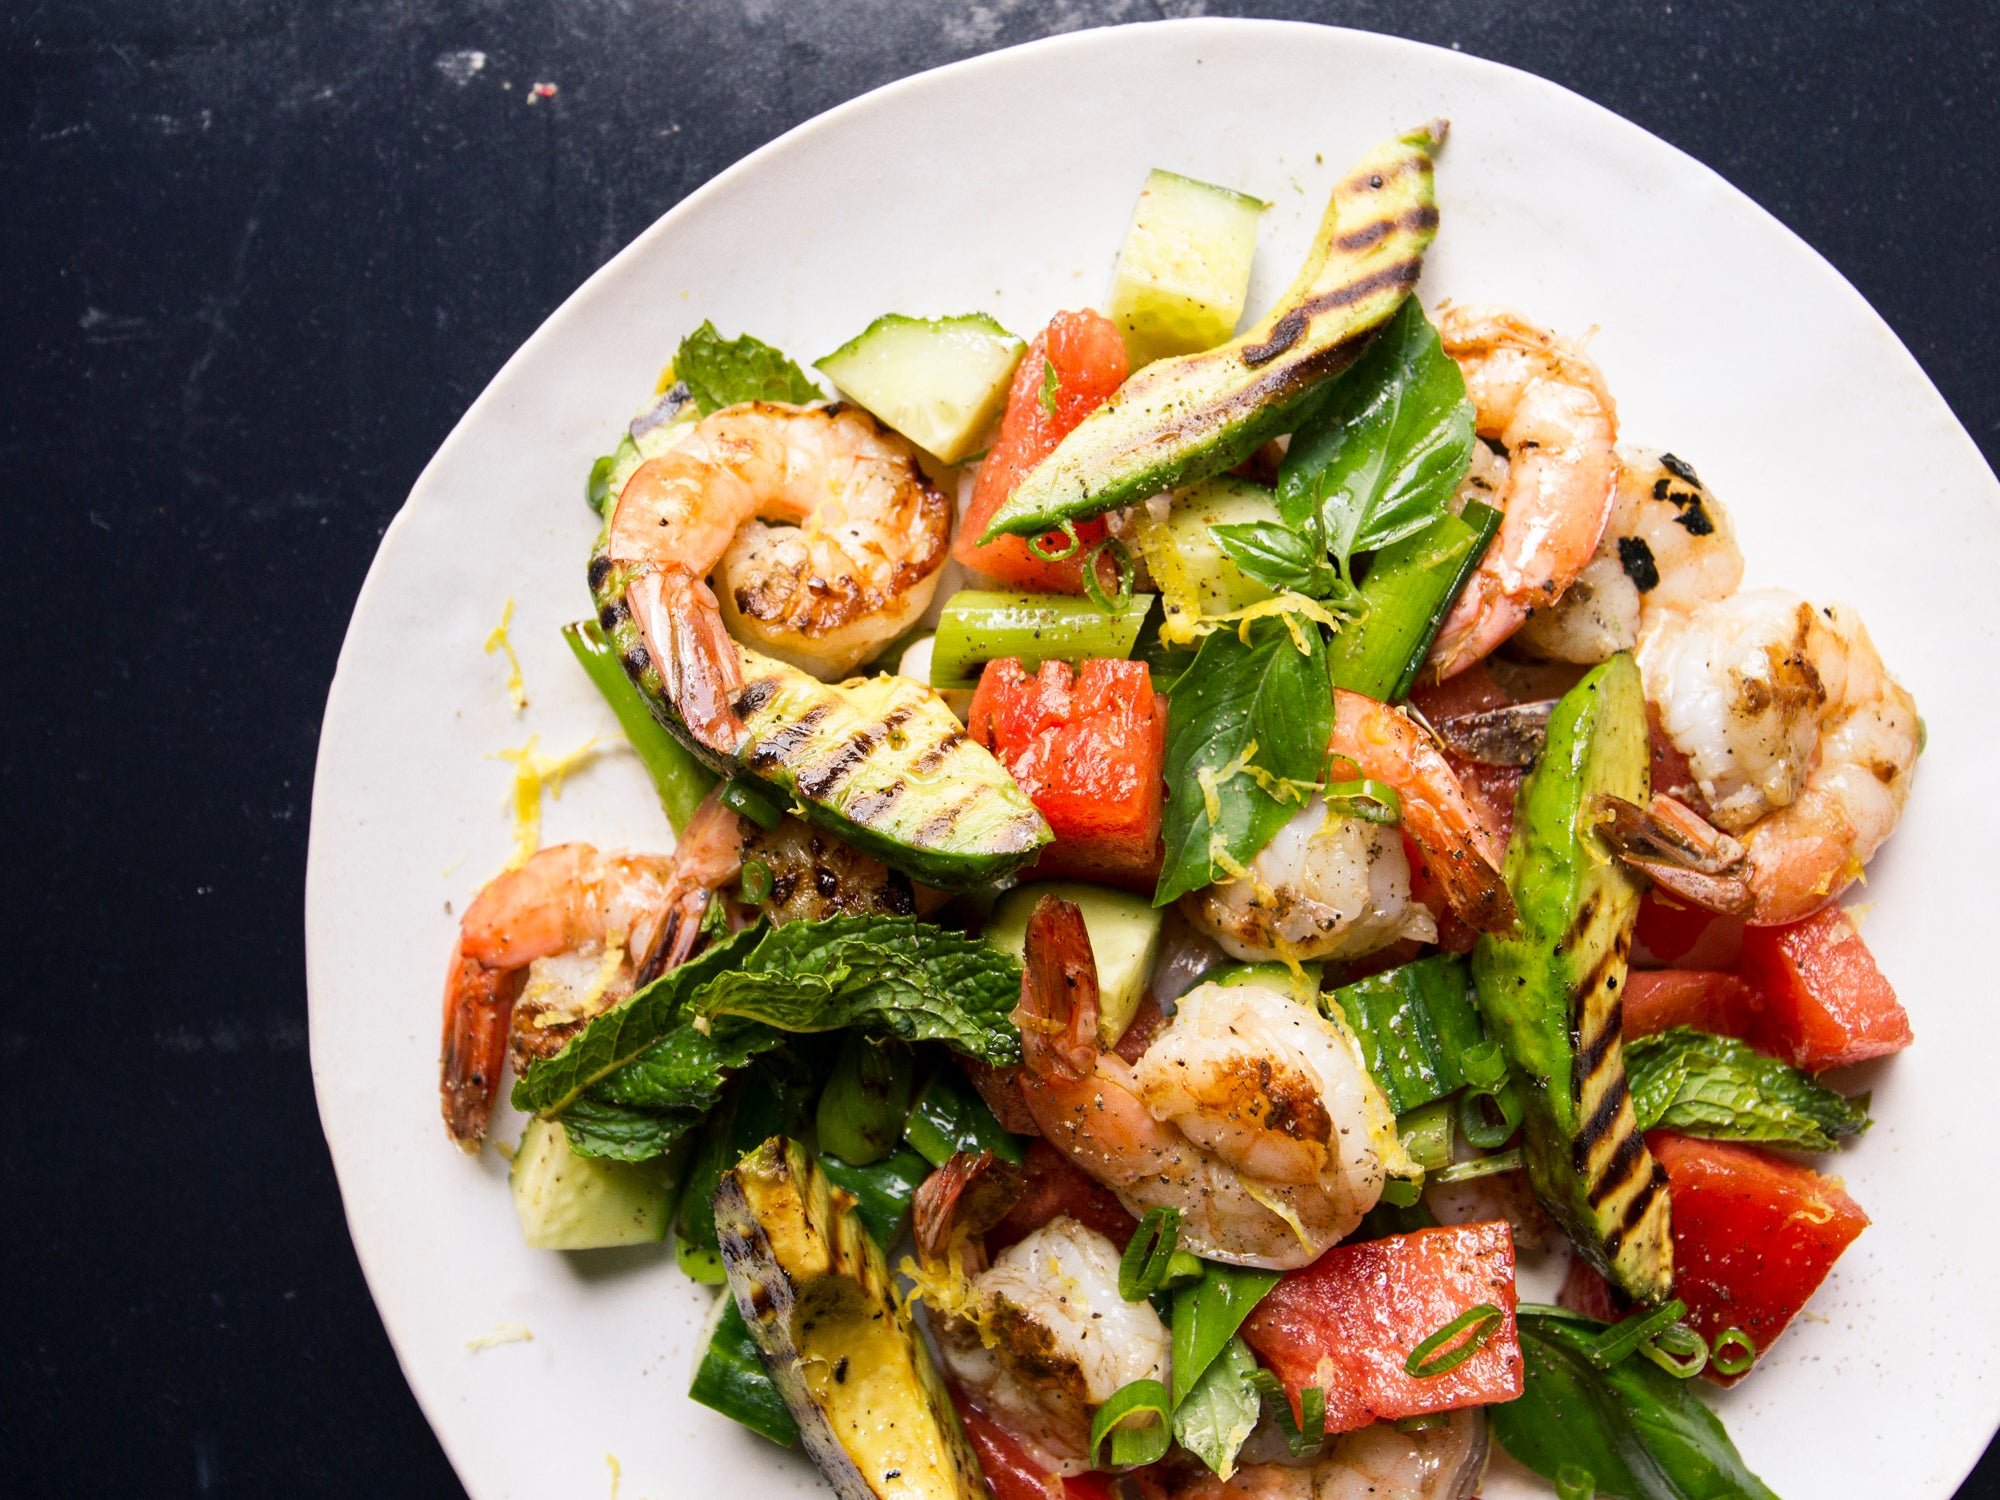 If You Ever Wondered What Summer Tastes Like, Try These Grilled Salads